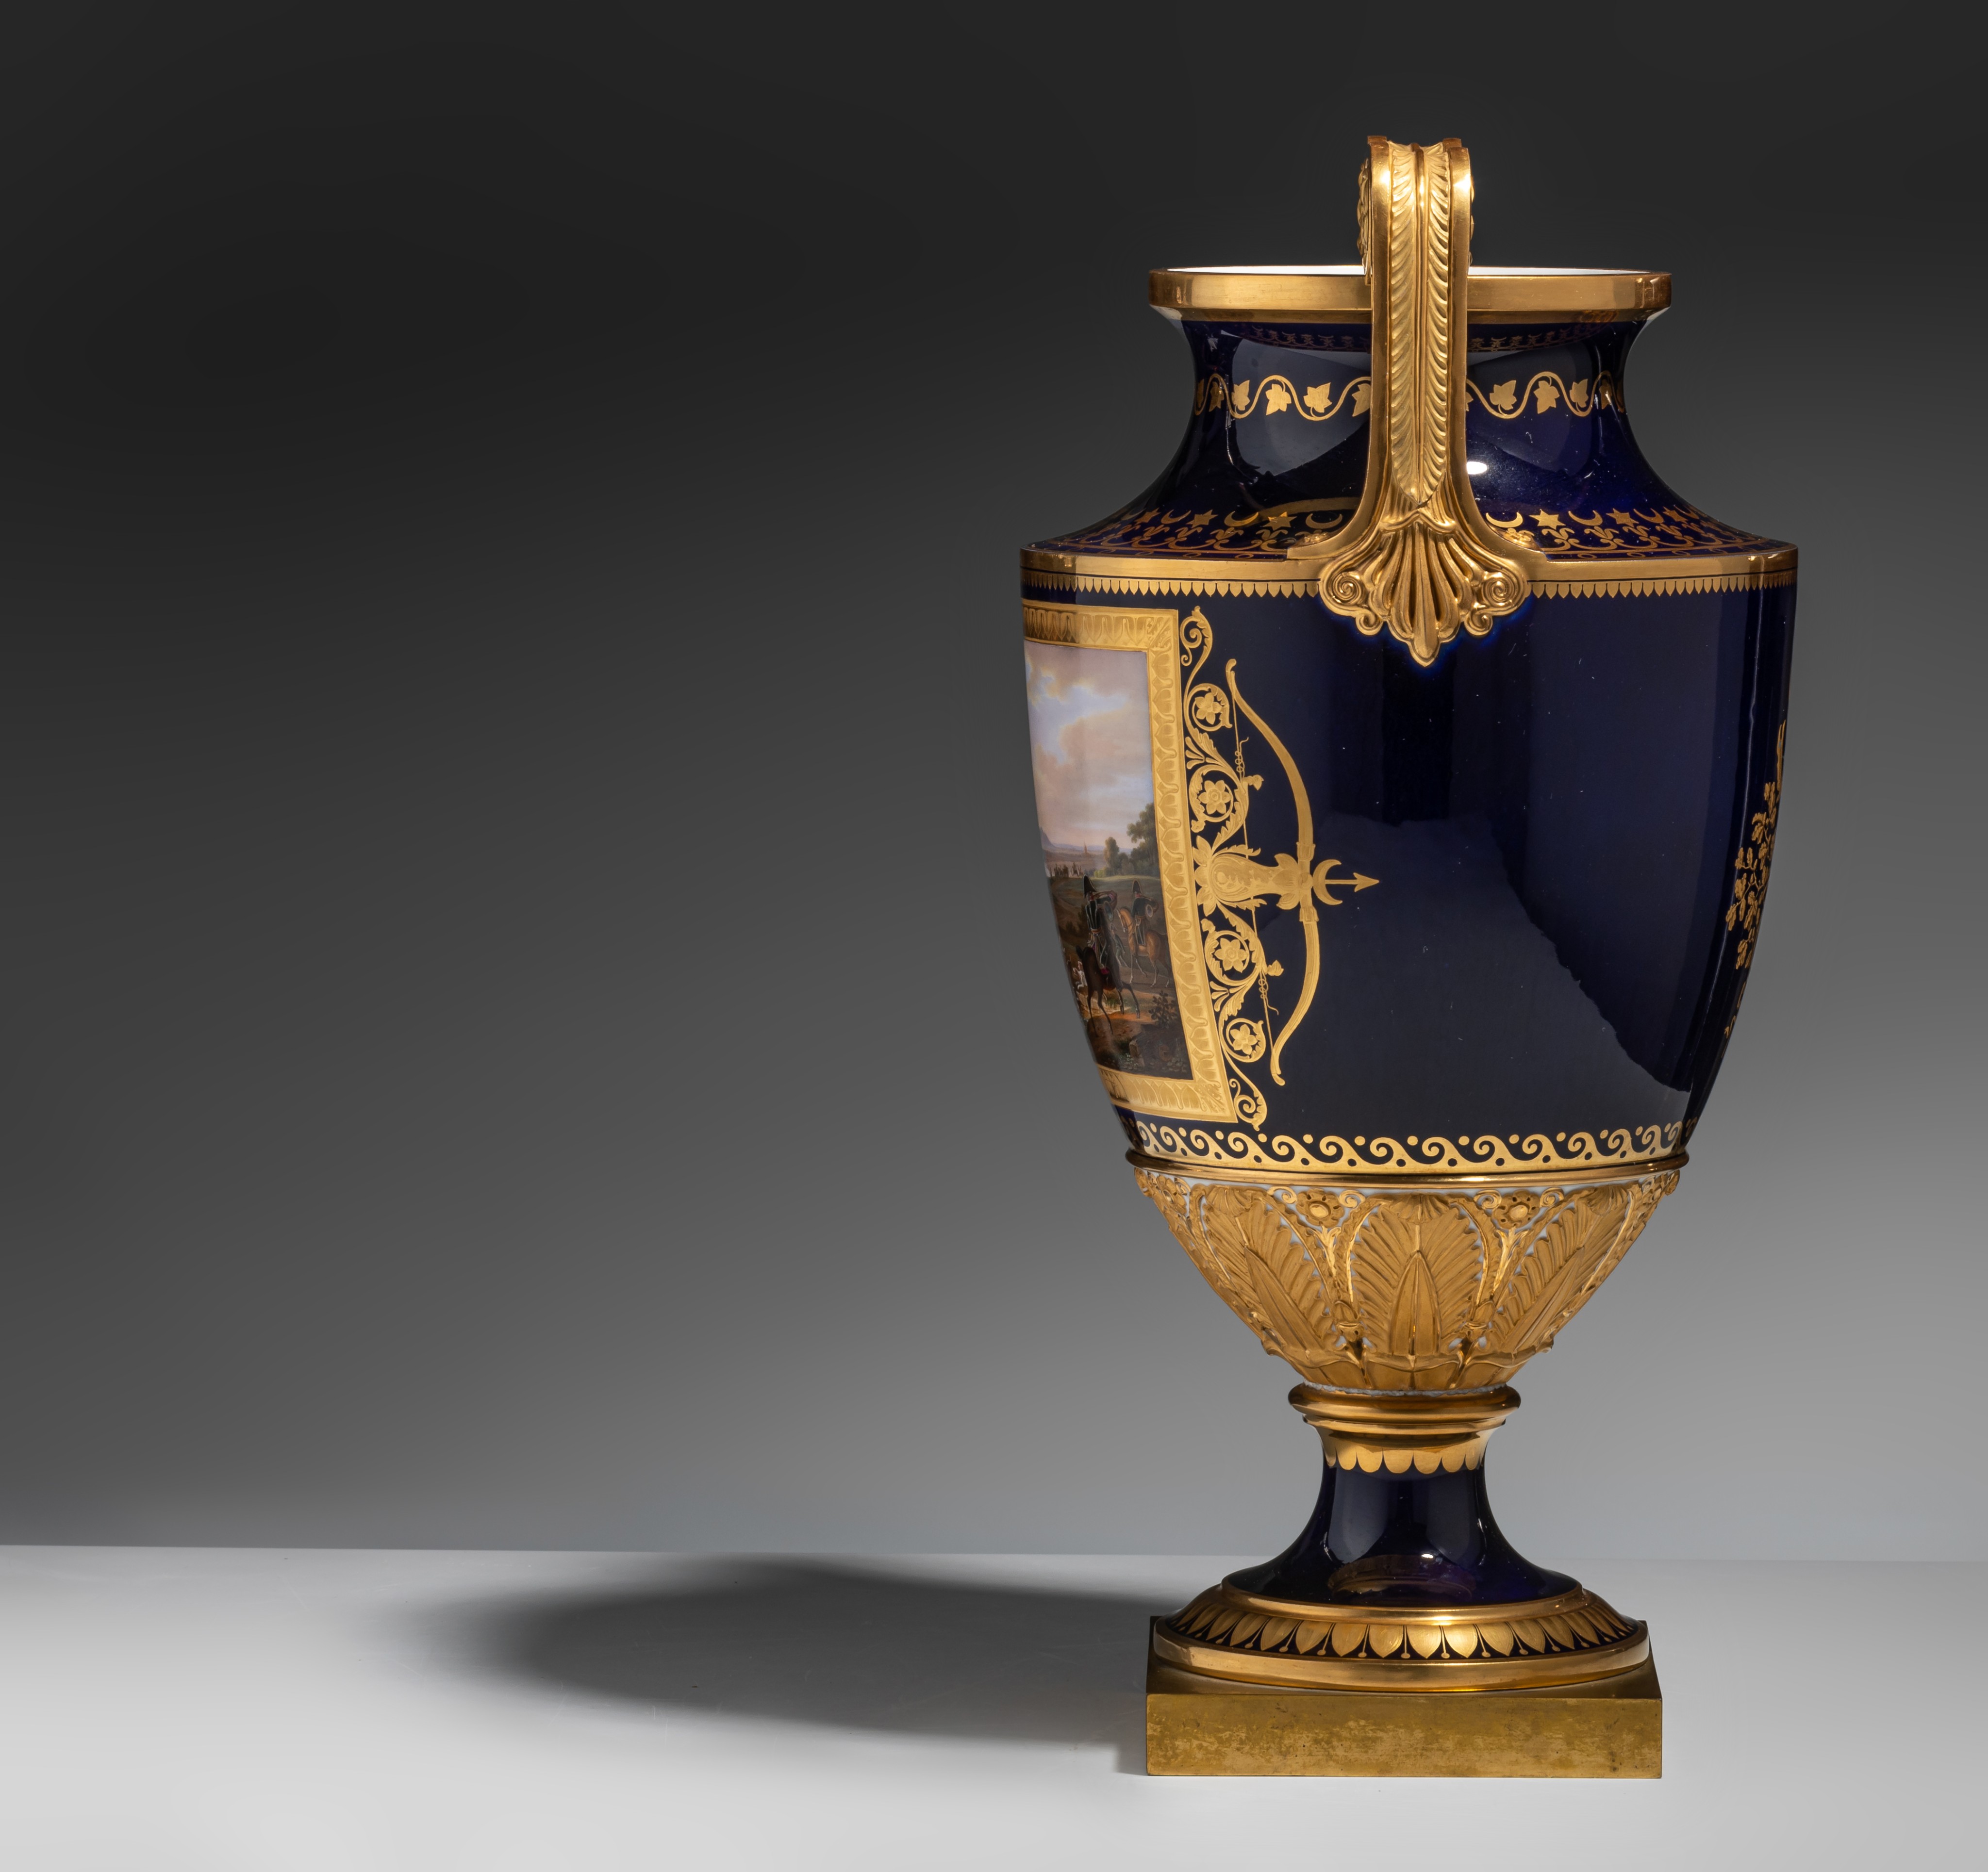 A very fine Empire Sèvres porcelain vase by Jean Charles Develly (1783-1862), 1819, H 44,5 cm - Image 3 of 7